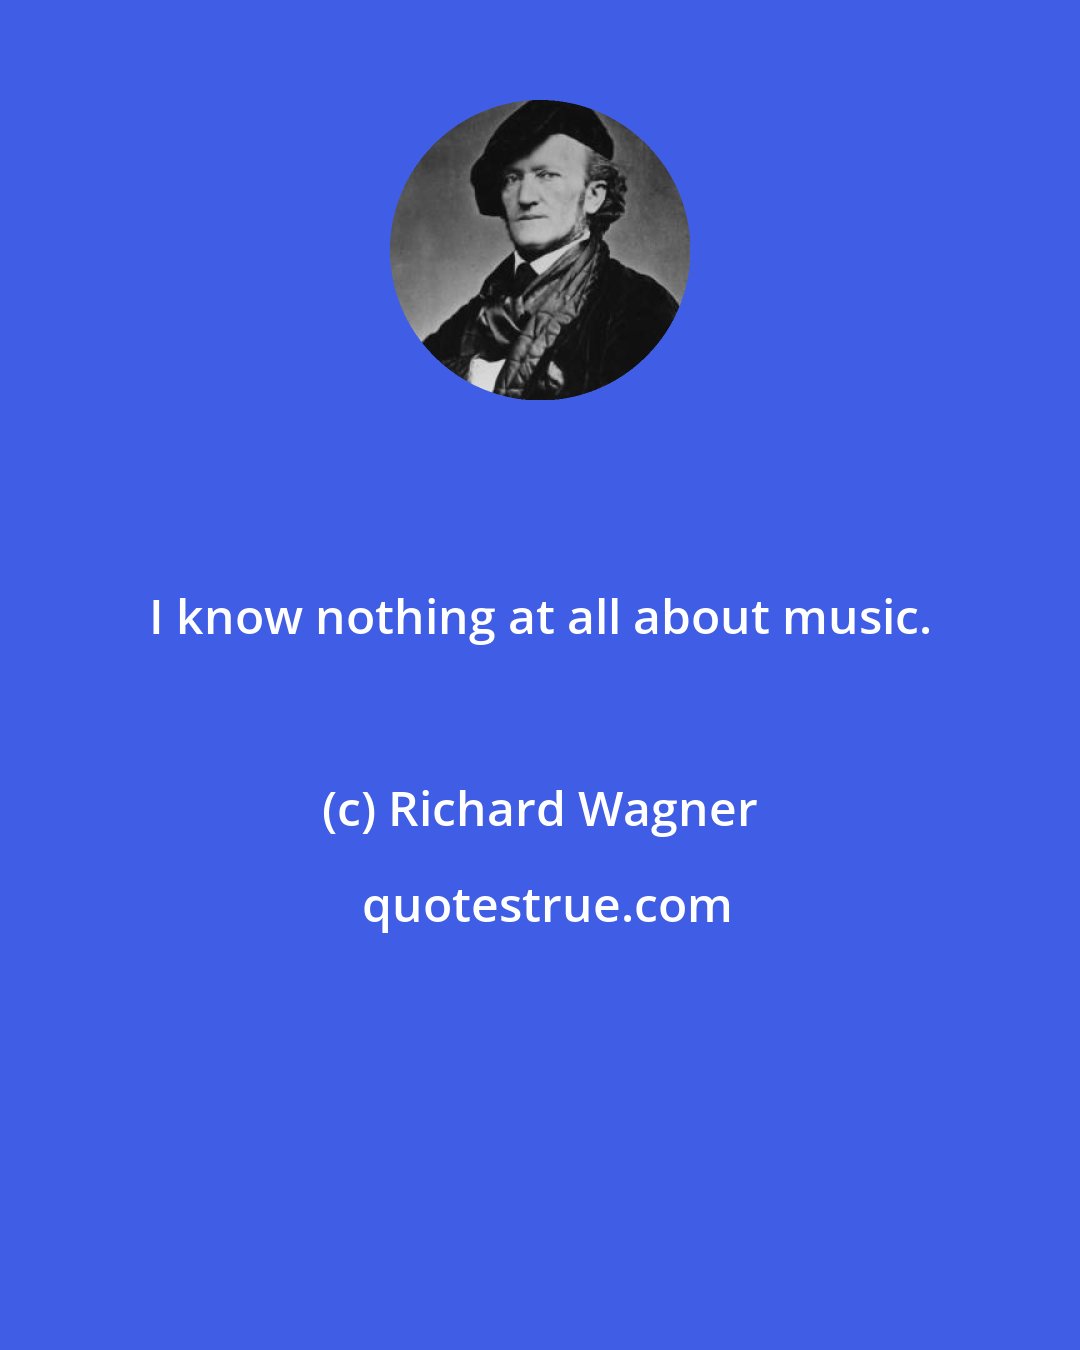 Richard Wagner: I know nothing at all about music.